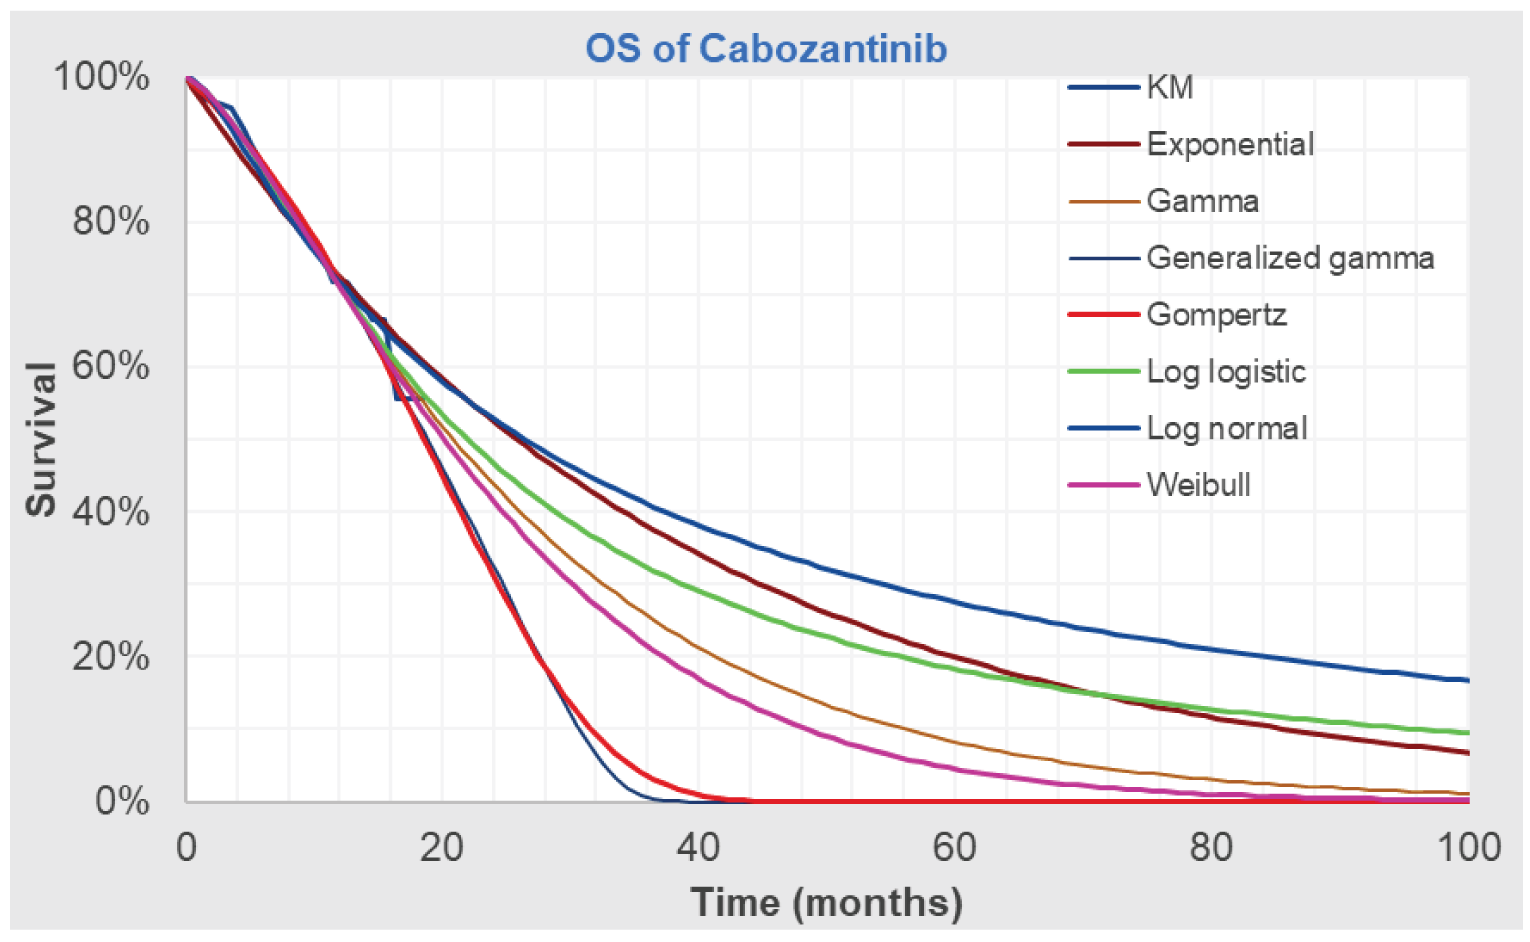 The figure that follows outlines the proportion of patients on cabozantinib who remain alive over time as observed in the trial (e.g., Kaplan-Meier curves) or as extrapolated based on different parametric survival functions.